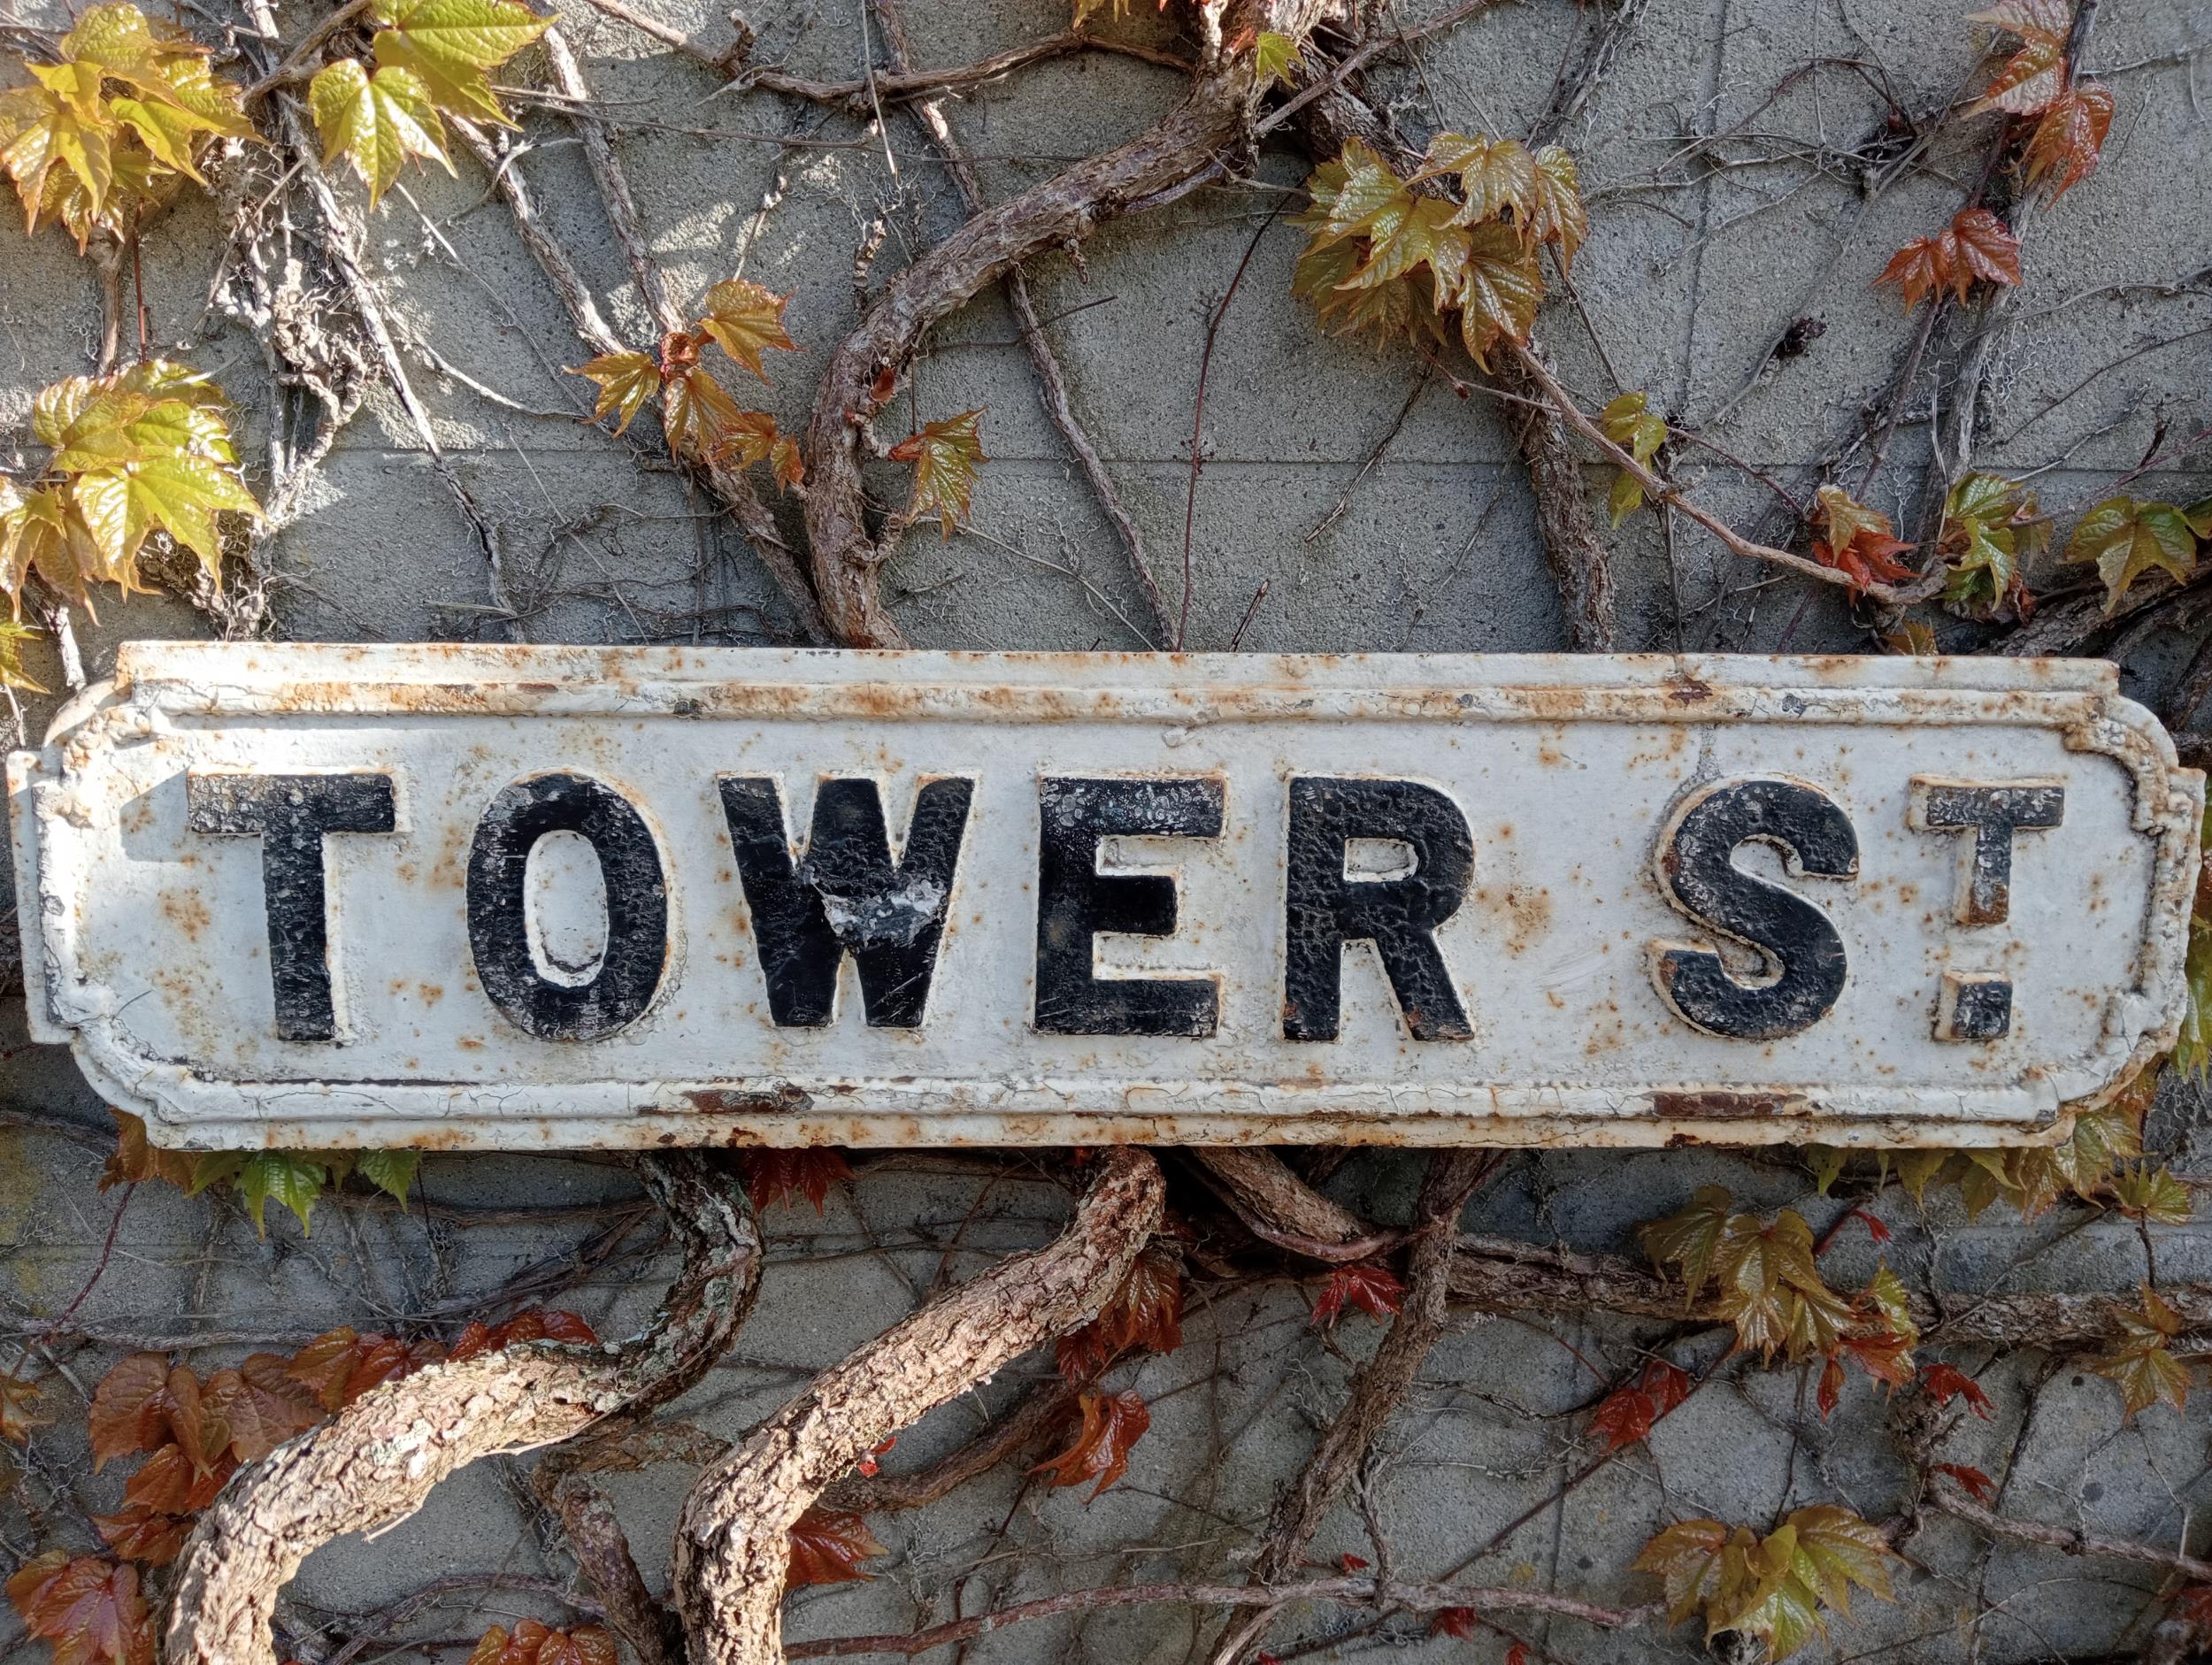 Cast iron Street sign Tower St {H 18cm x W 76cm }. (NOT AVAILABLE TO VIEW IN PERSON) - Bild 2 aus 2